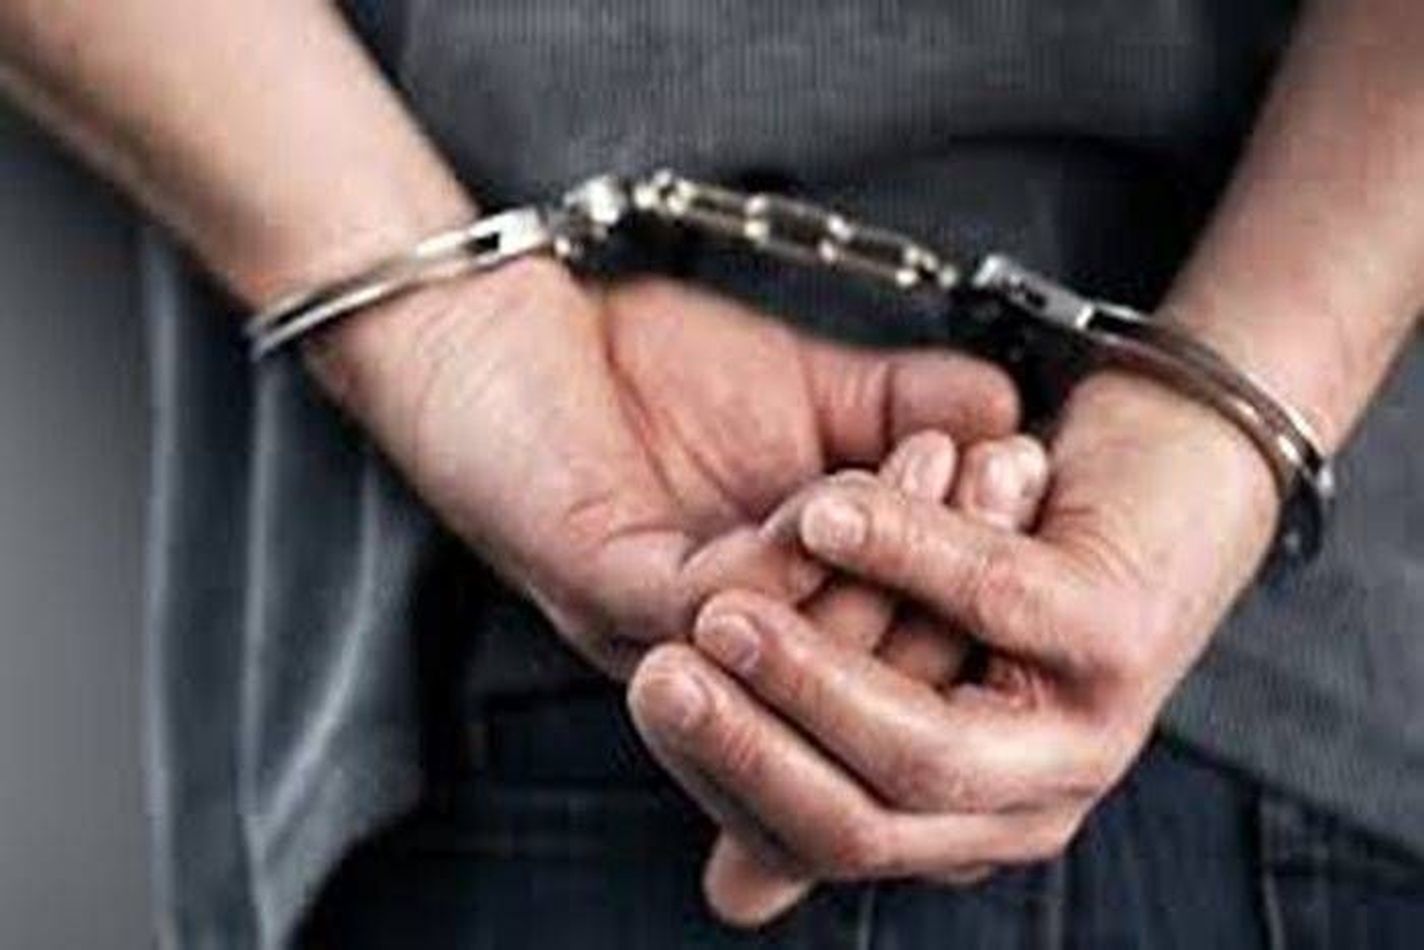 Bikaner: Youth arrested with drugs in Chhatargarh